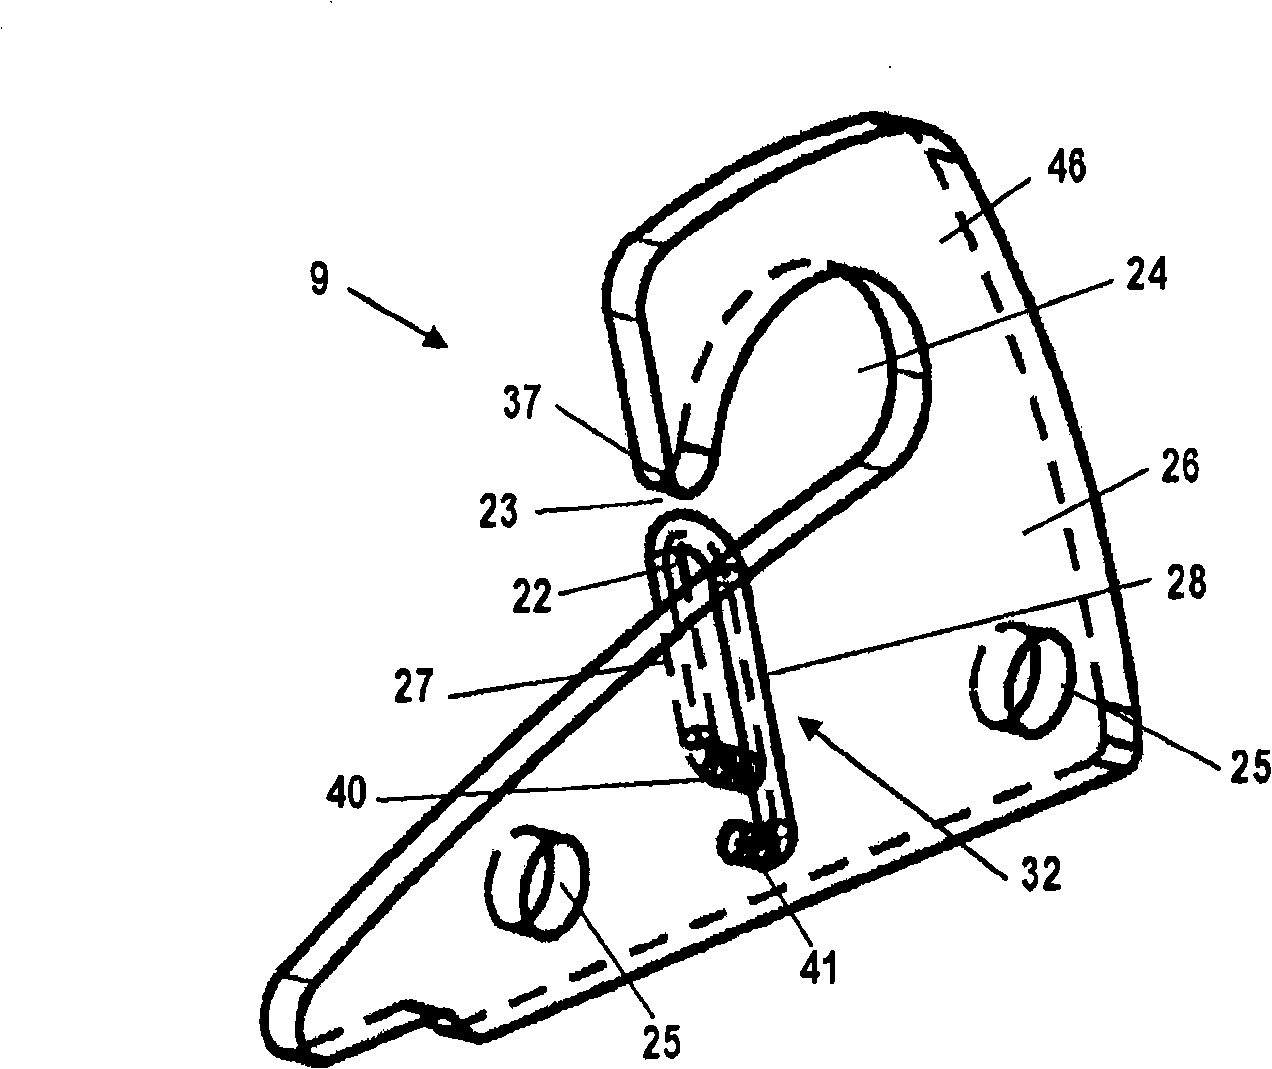 Hook and support assembly